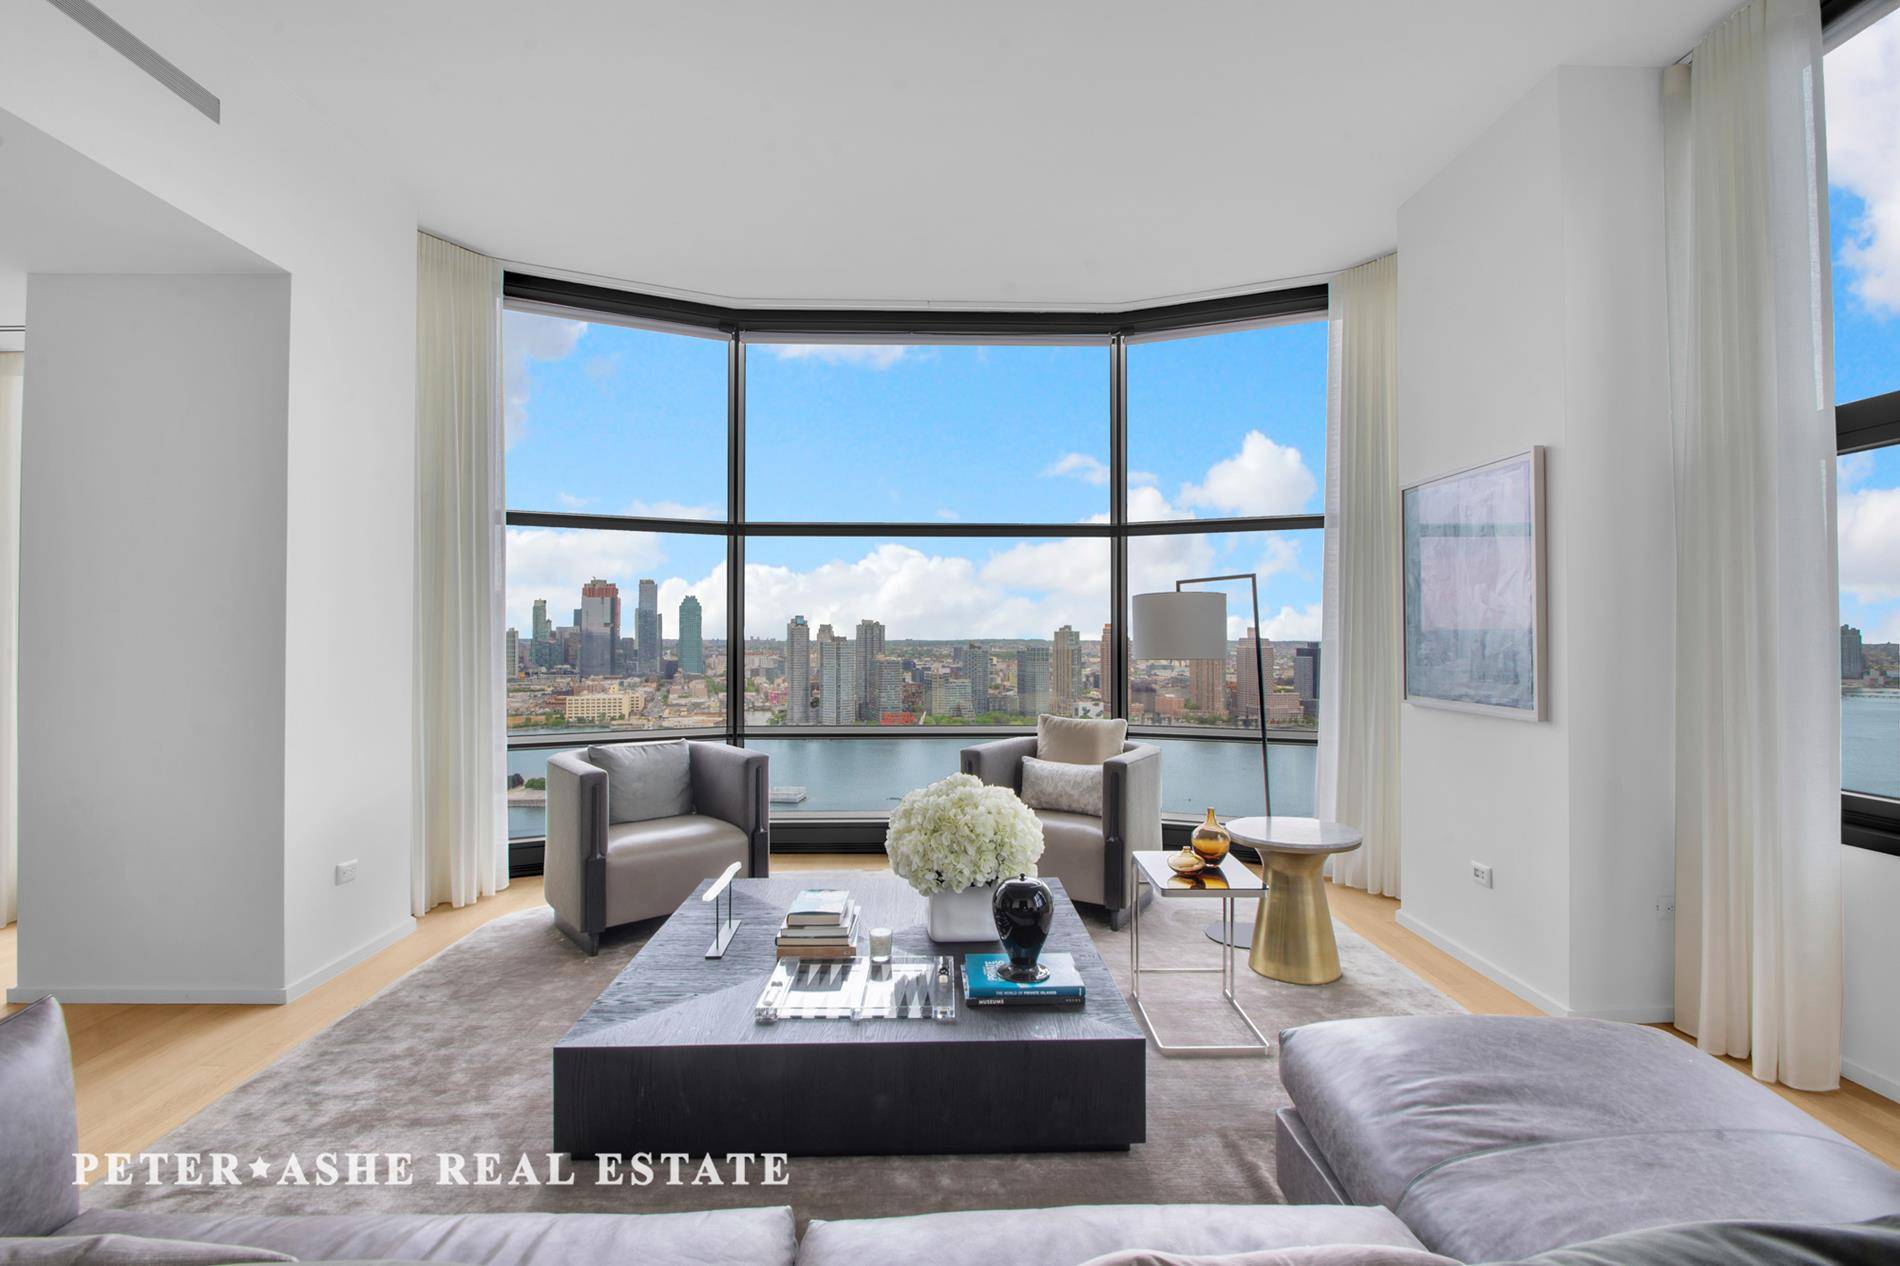 Experience the privilege of being resident of this expansive, three bedroom, three bathroom residence occupying half of the 31st floor at the esteemed 50 United Nations Plaza.